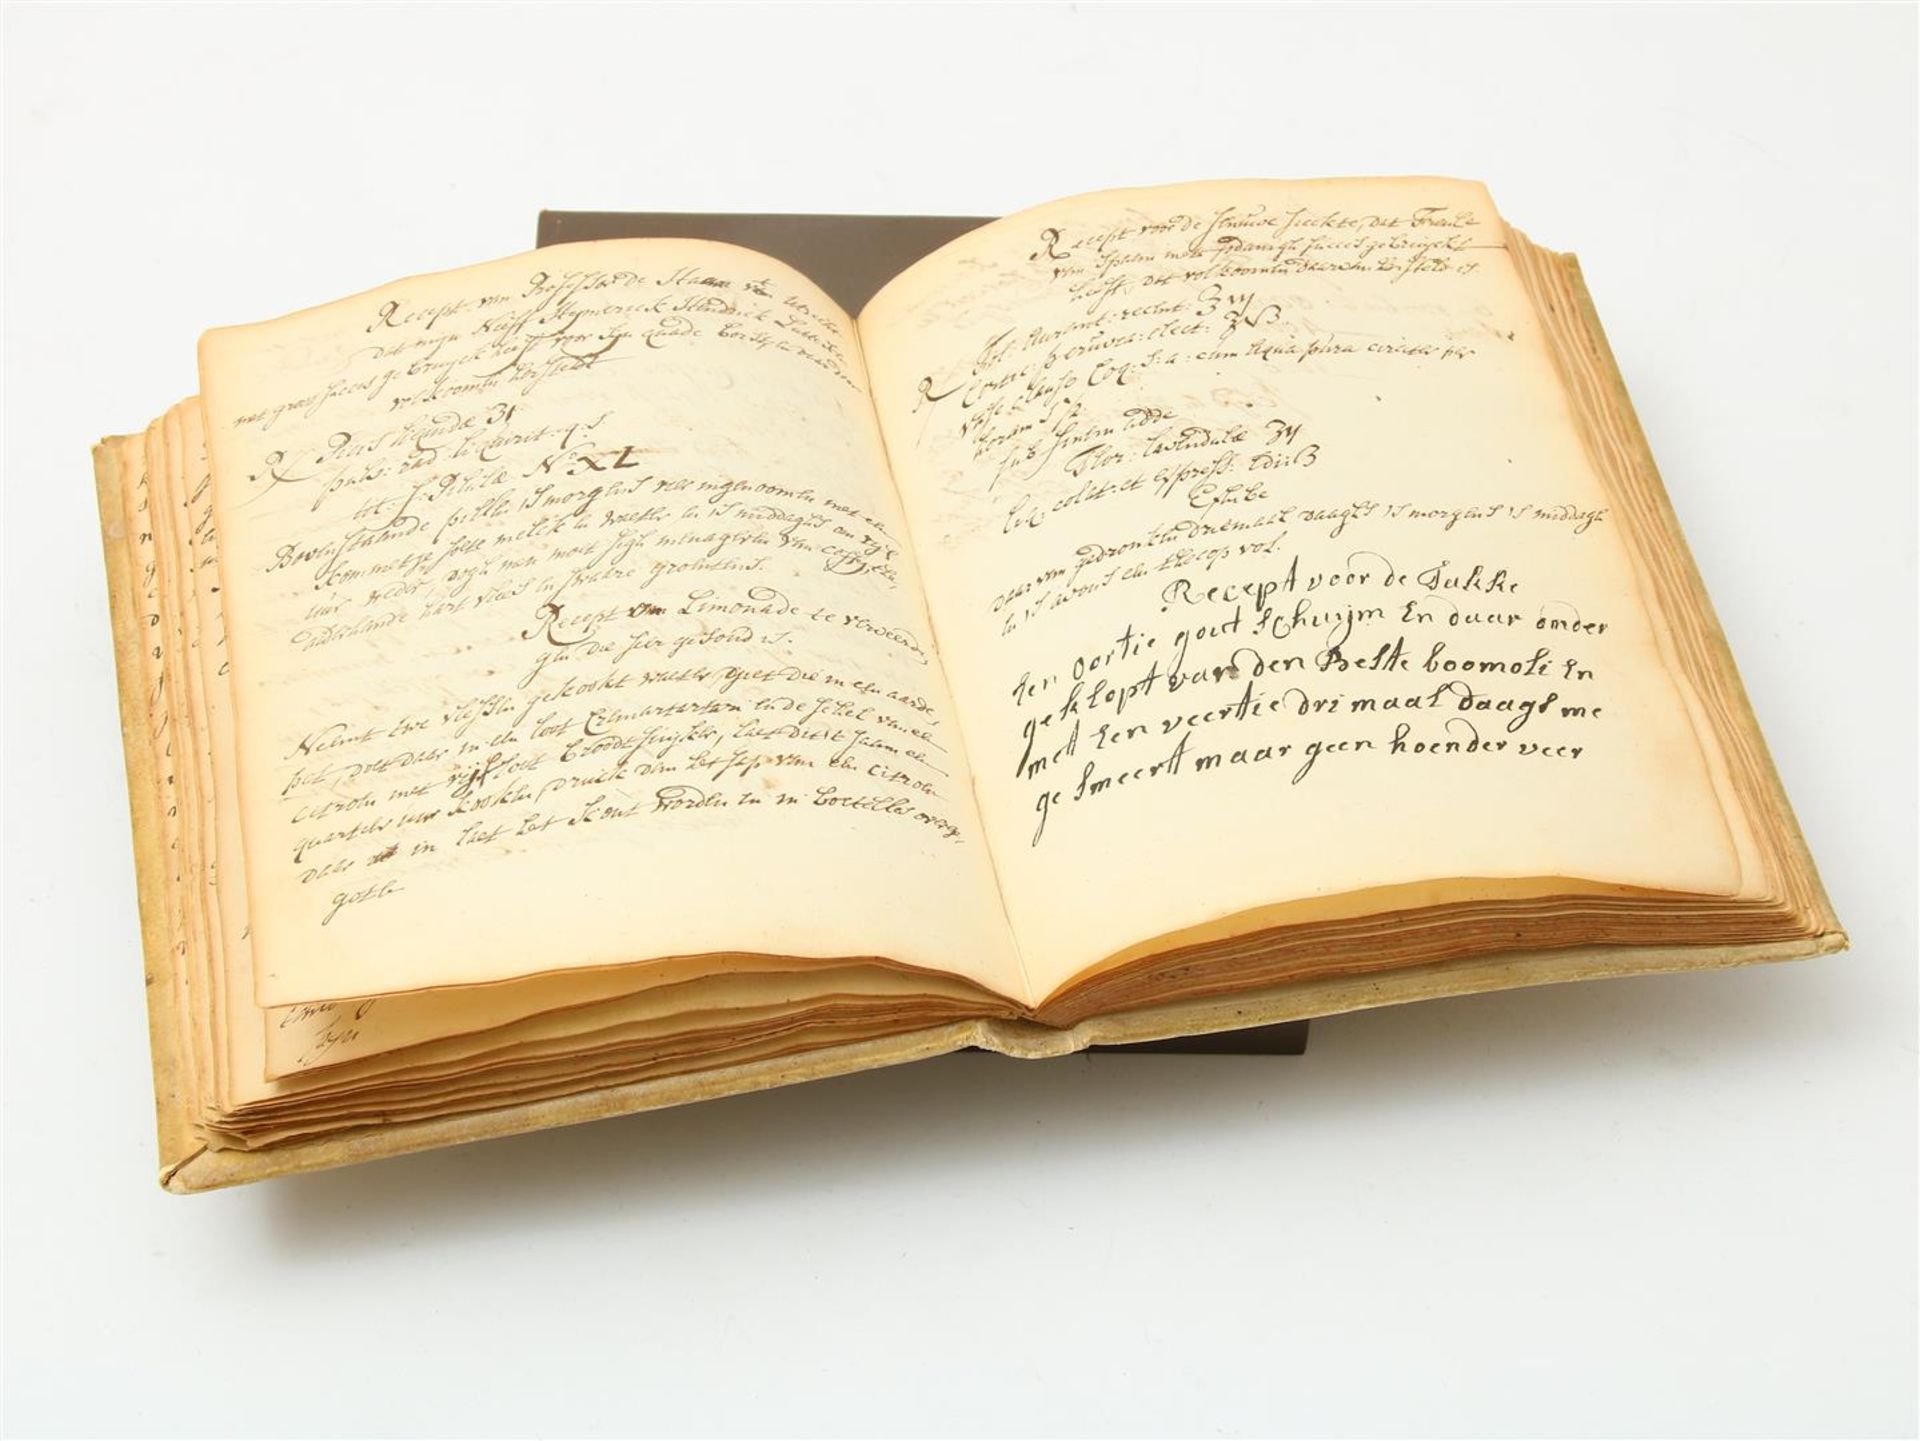 Cookbook with 18th century recipes